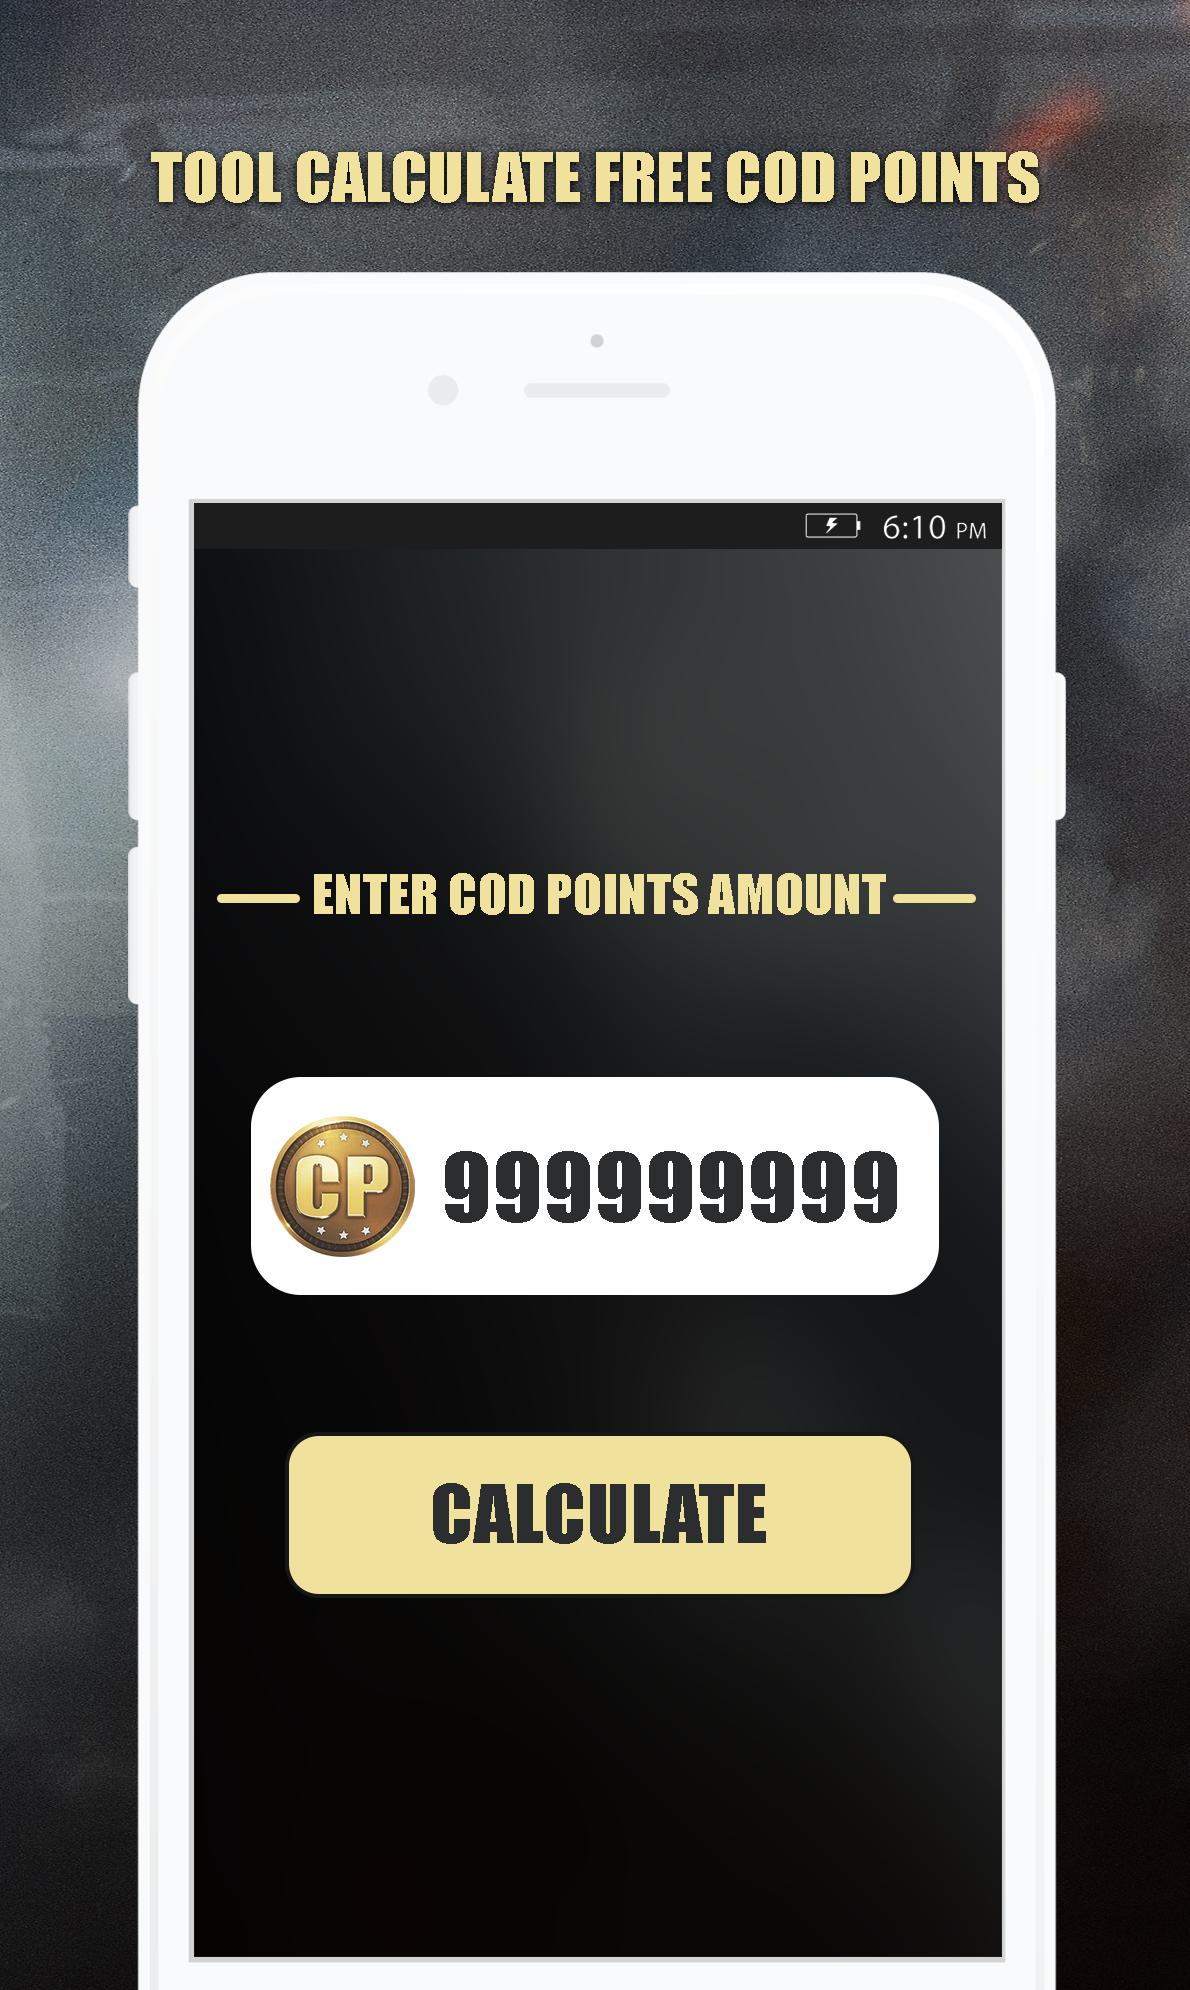 [Unlimited] Free Cod Points & Credits Call Of Duty Mobile Free Cod Points No Verification